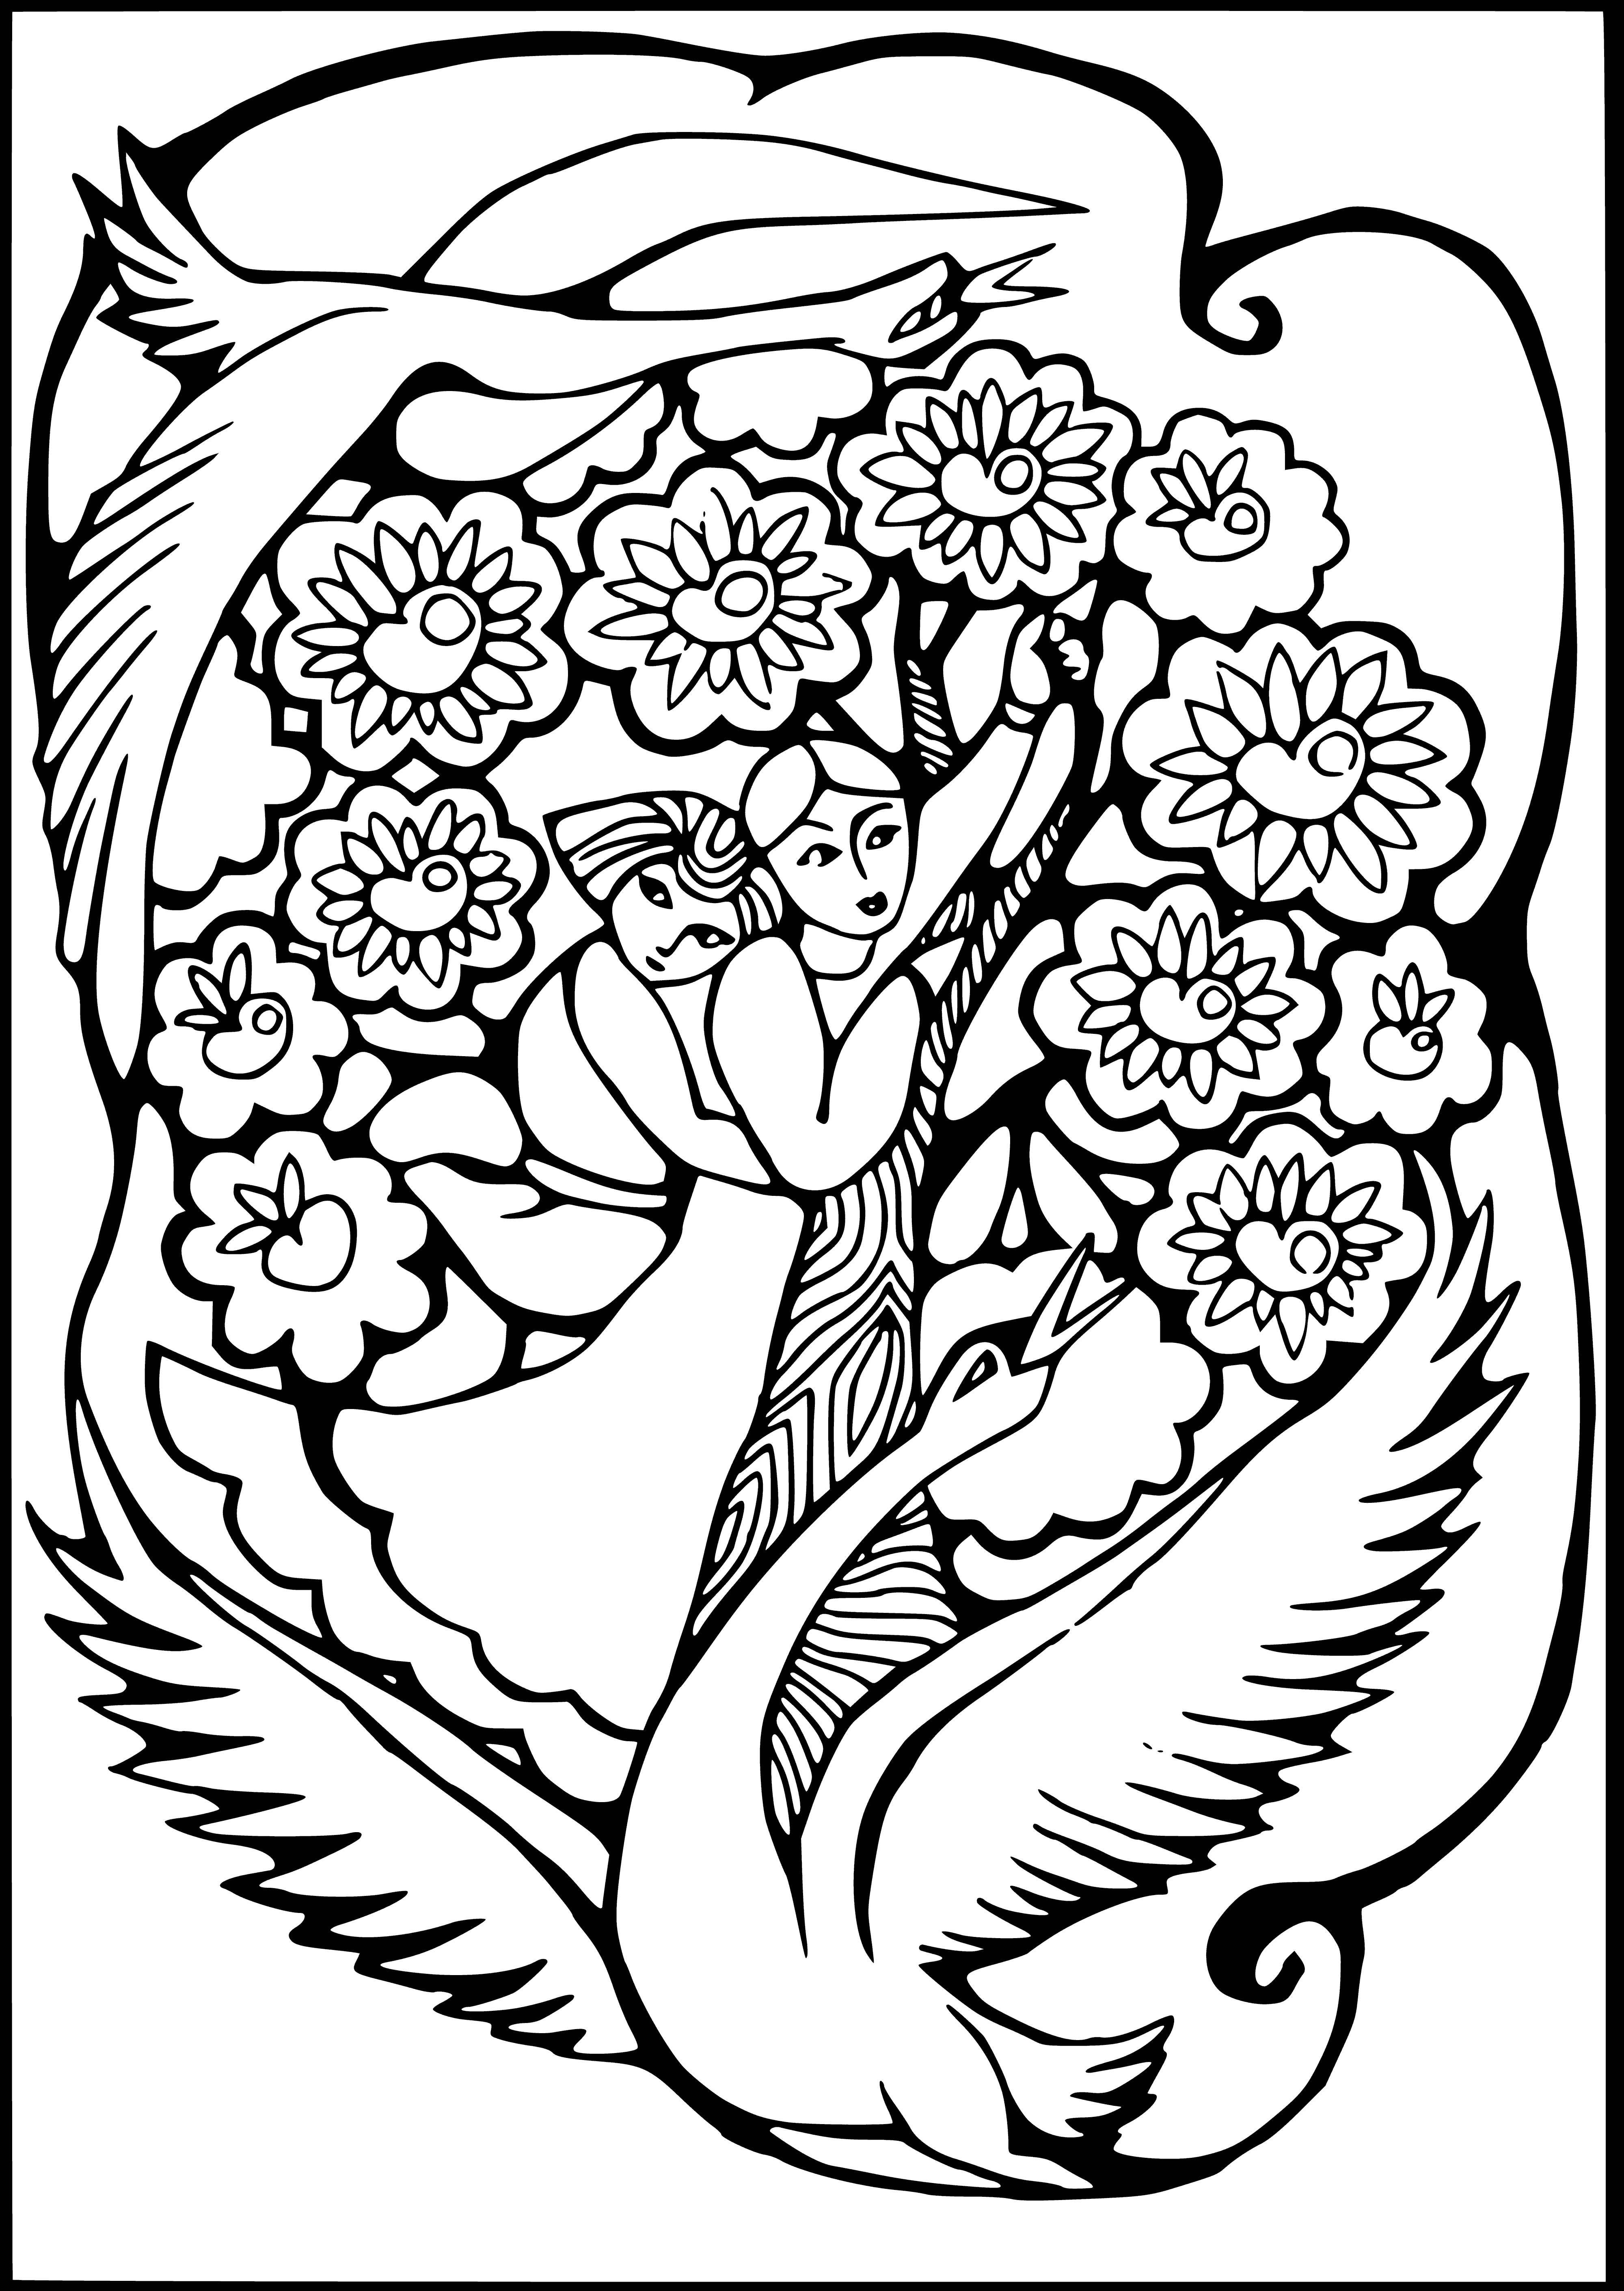 Apple tree helped children coloring page